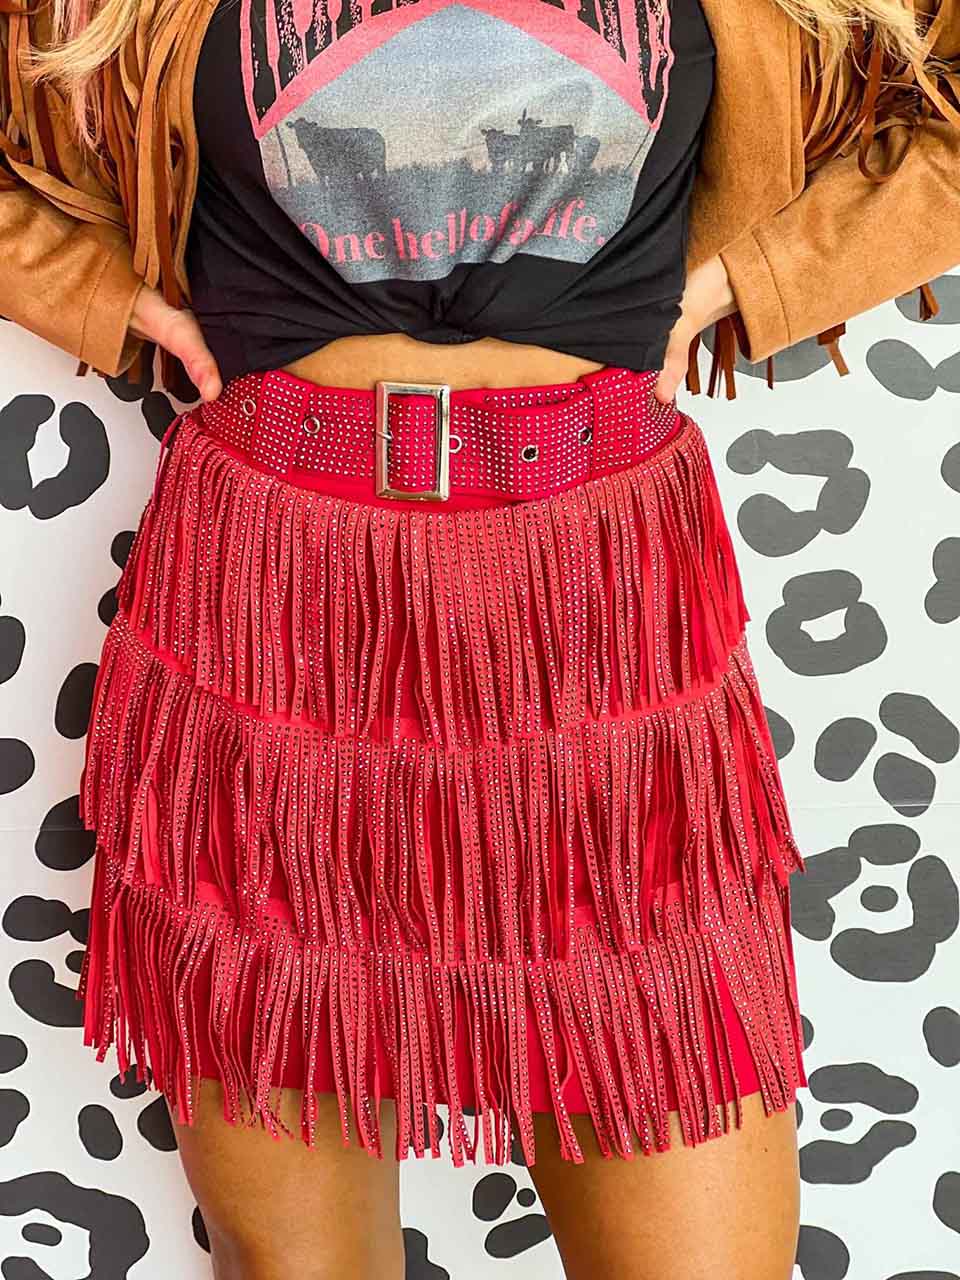 Red fringe mini skirt with built in shorts.